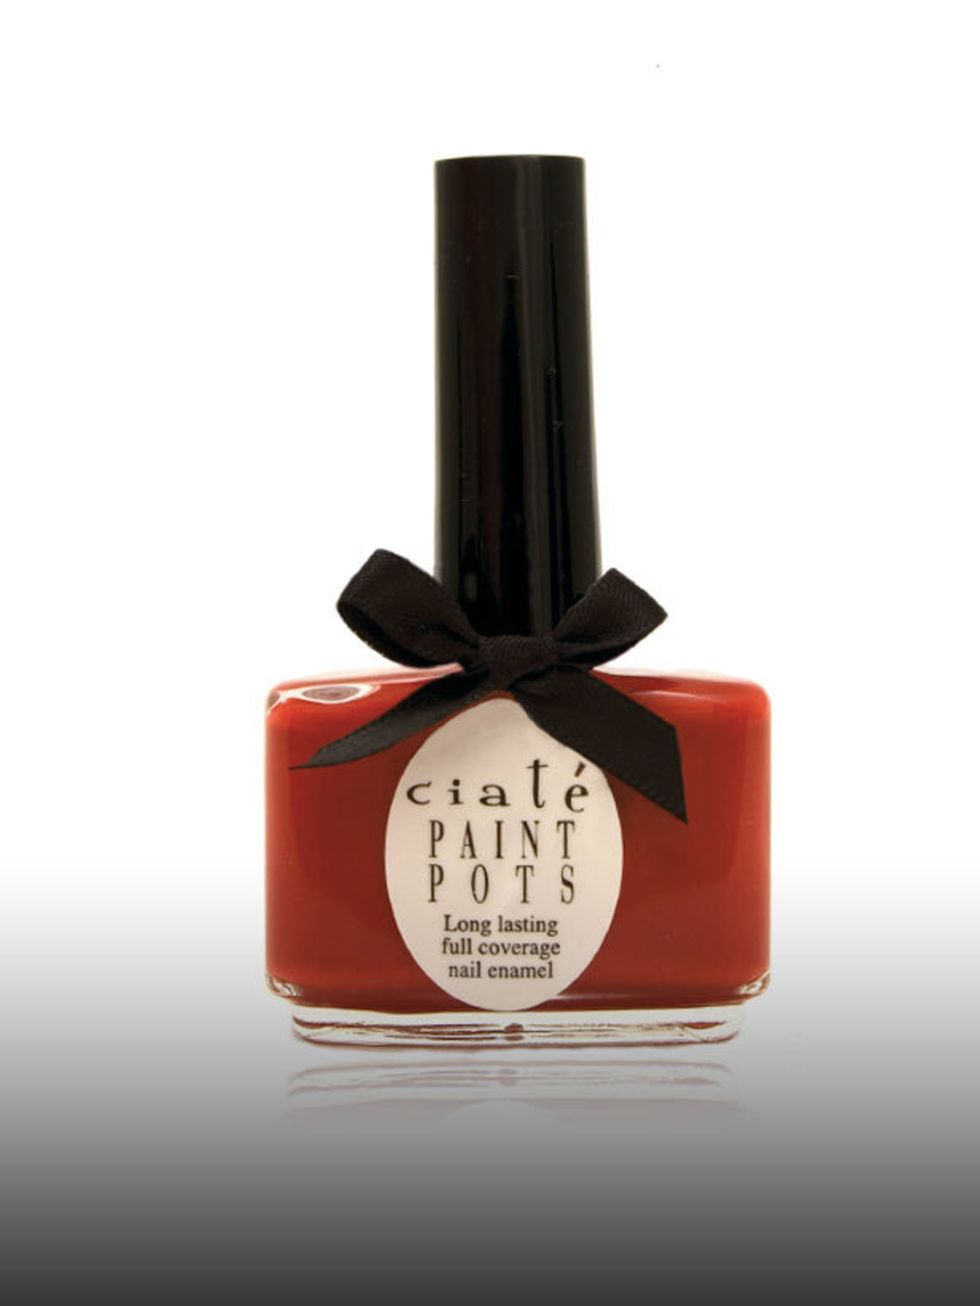 <p>Nail polish in Mistress, £7.50 by Ciate at <a href="http://www.hqhair.com/code/products.asp?PageID=1559&amp;SectionID=2231&amp;FeaturedProduct=14325&amp;pID=1">HQHair.com</a>.</p><p>Kimberly is the new face of Ciate and along with swearing by their Mis